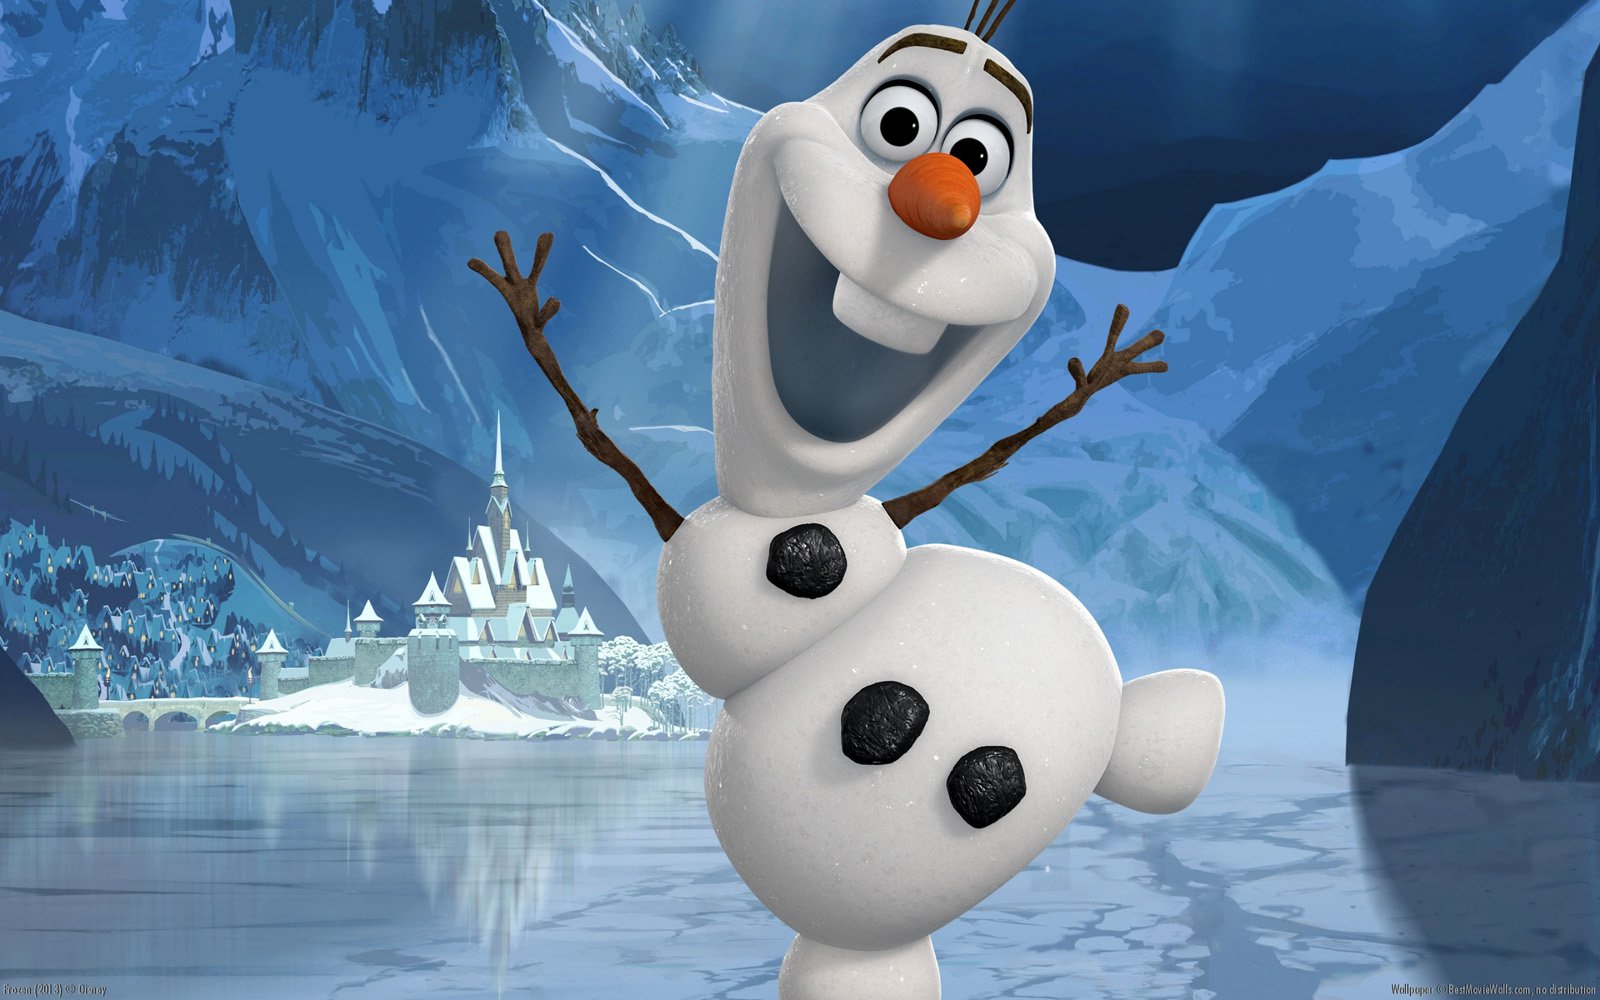 Meet Olaf The Adorable Snowman In Frozen